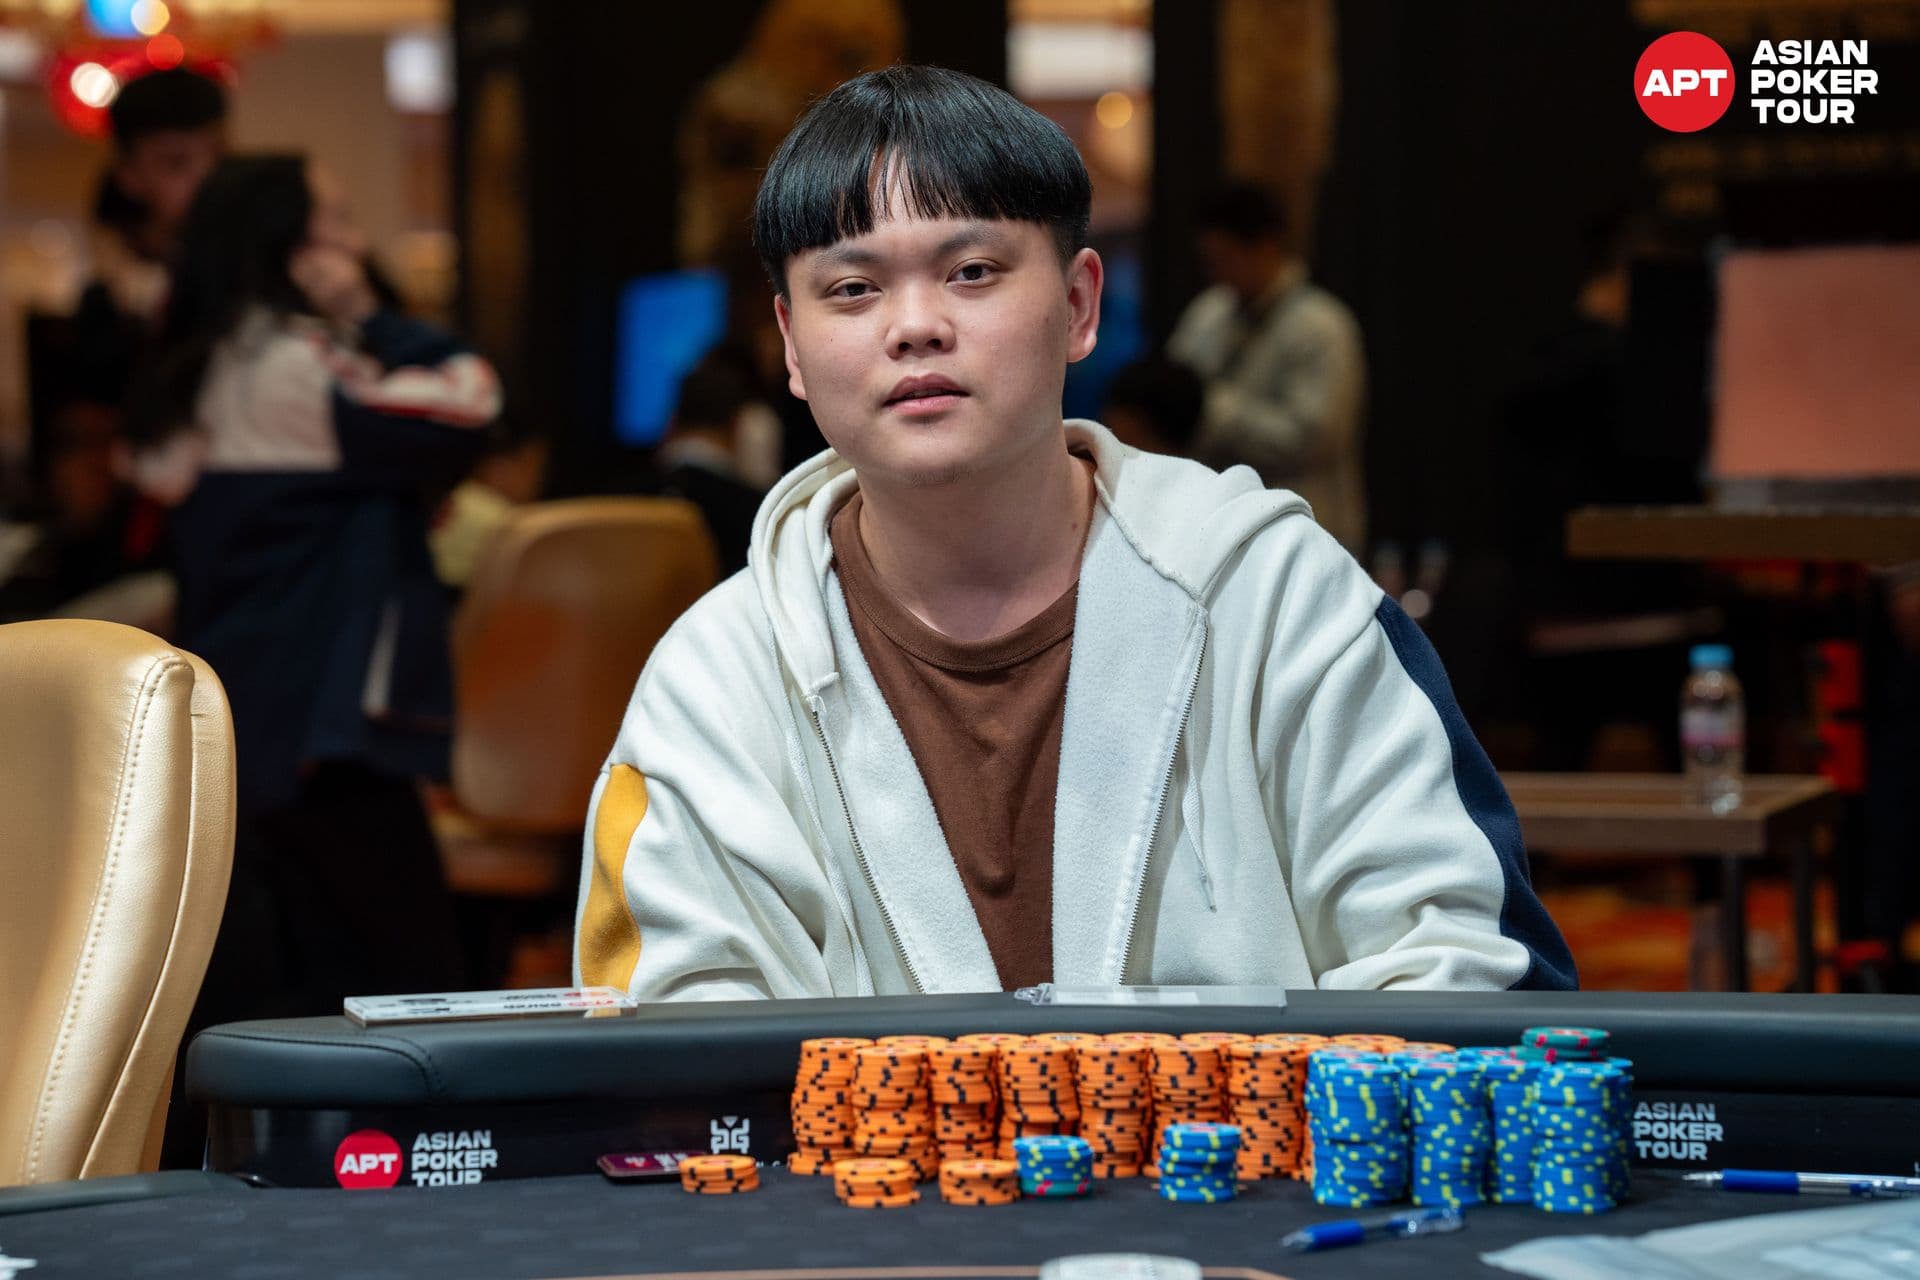 Main Event Sets Record For Largest International Poker Tournament in Korean History